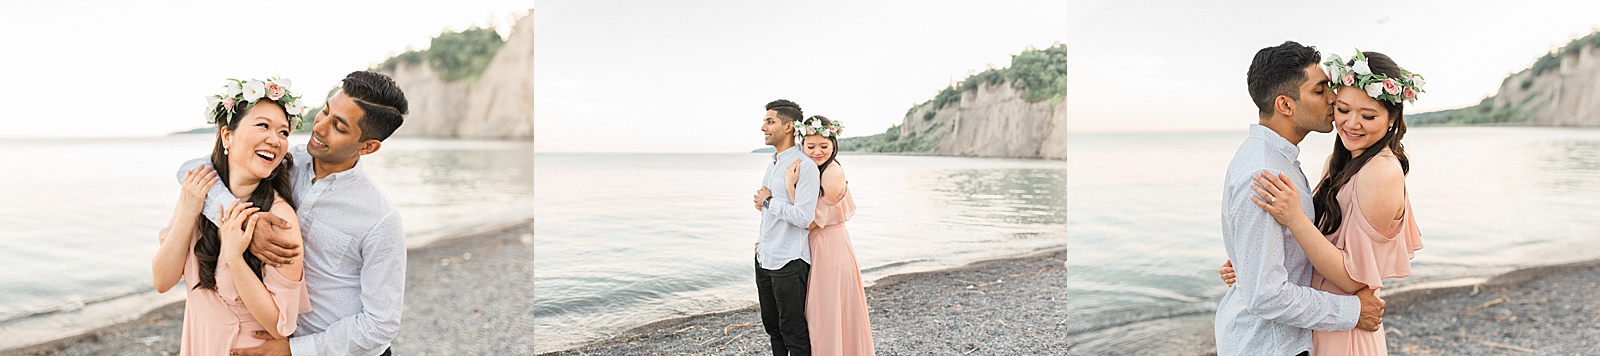 Engagement session at Scarborough Bluffs with pink dress and flower crown